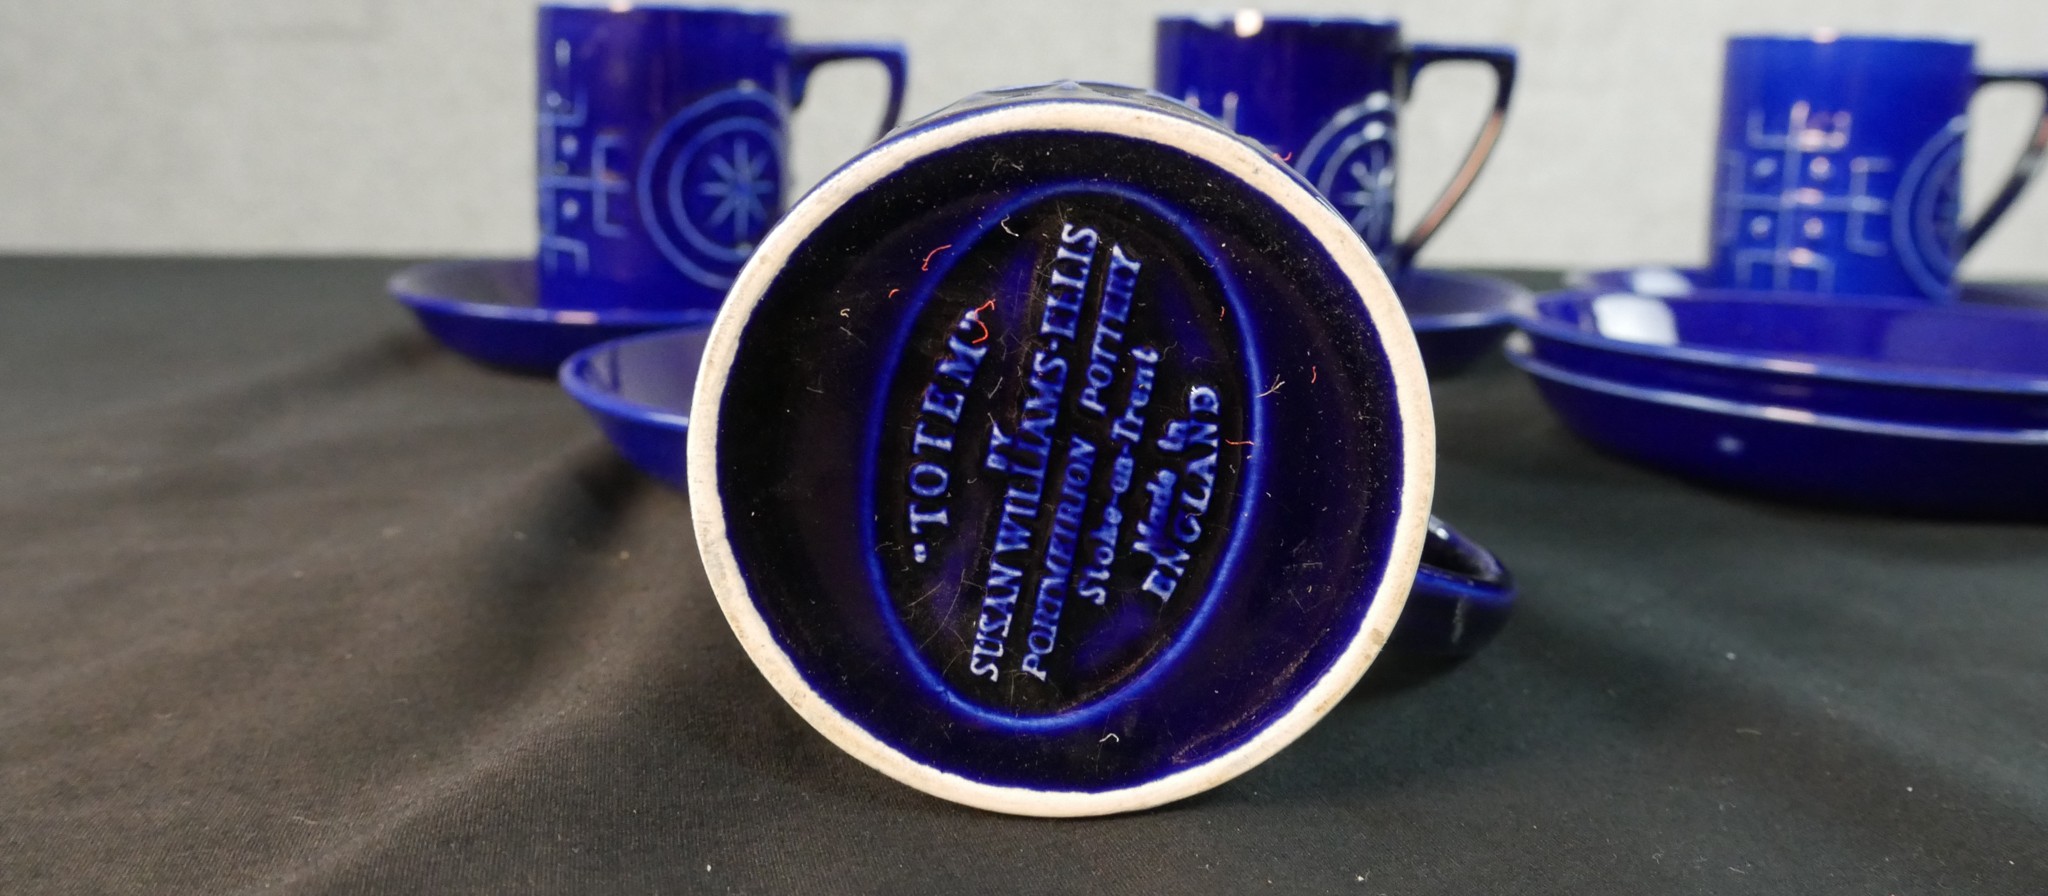 Susan Williams-Ellis for Portmeirion, a Totem pattern coffee set in a cobalt blue glaze, to seat - Image 5 of 6